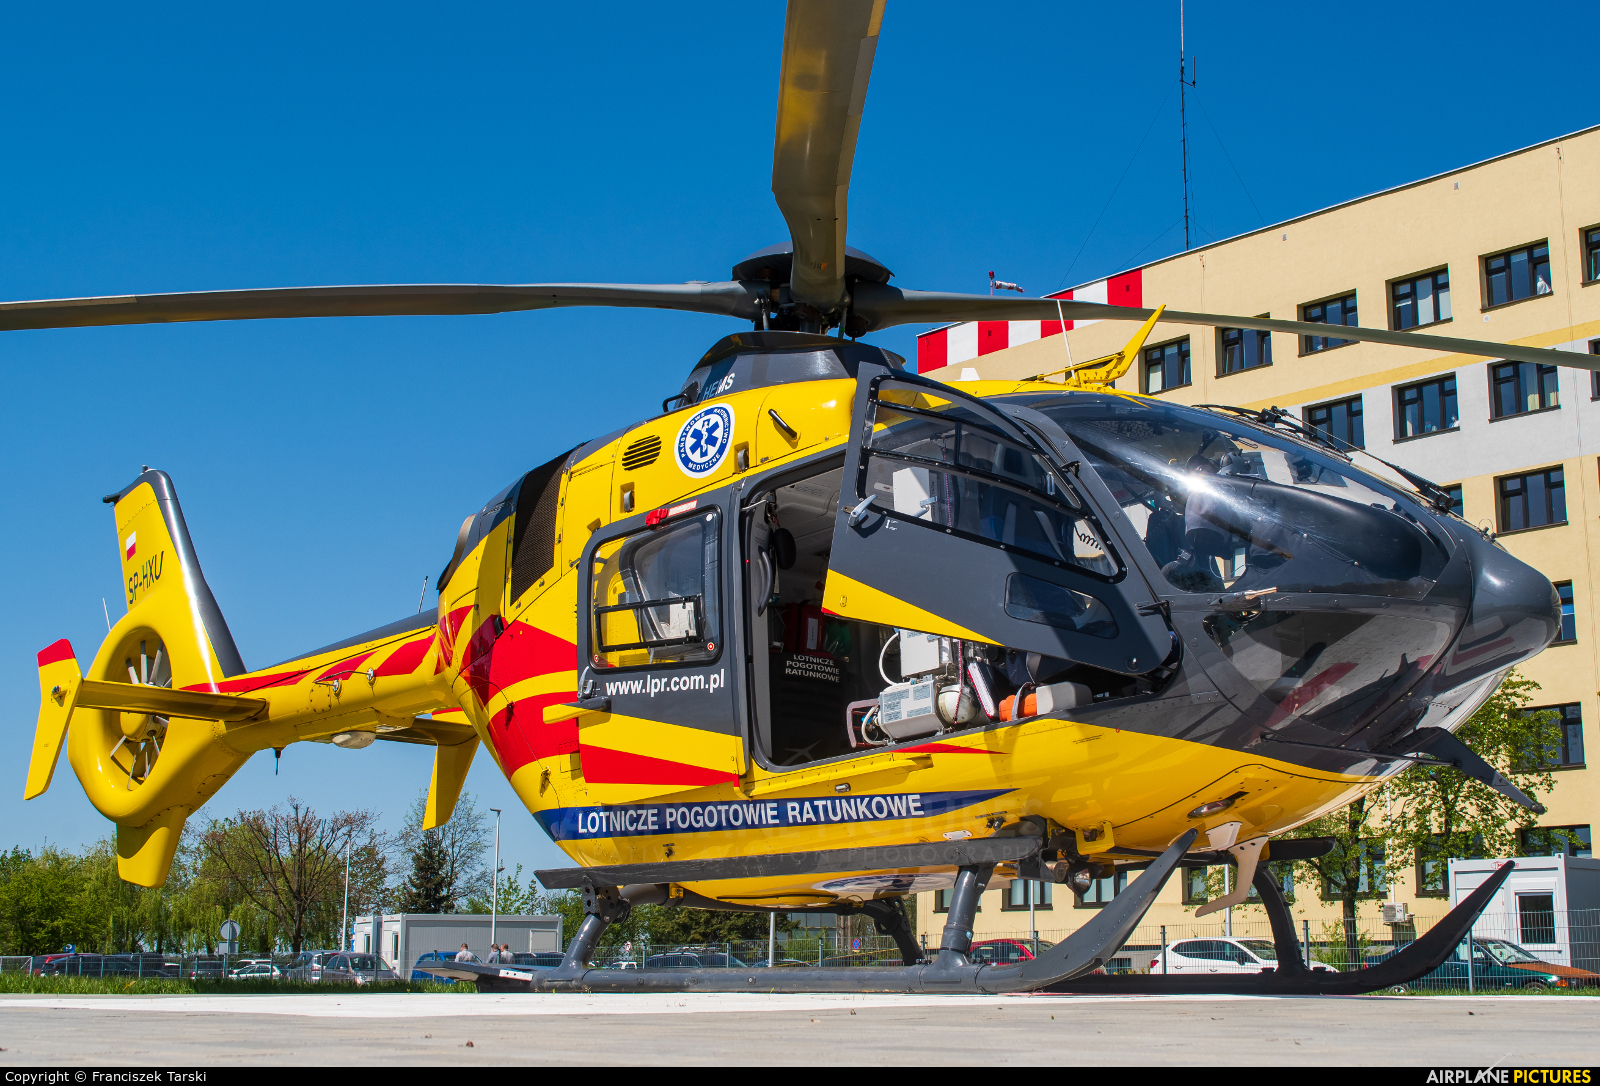 Polish Medical Air Rescue - Lotnicze Pogotowie Ratunkowe SP-HXU aircraft at Off Airport - Poland